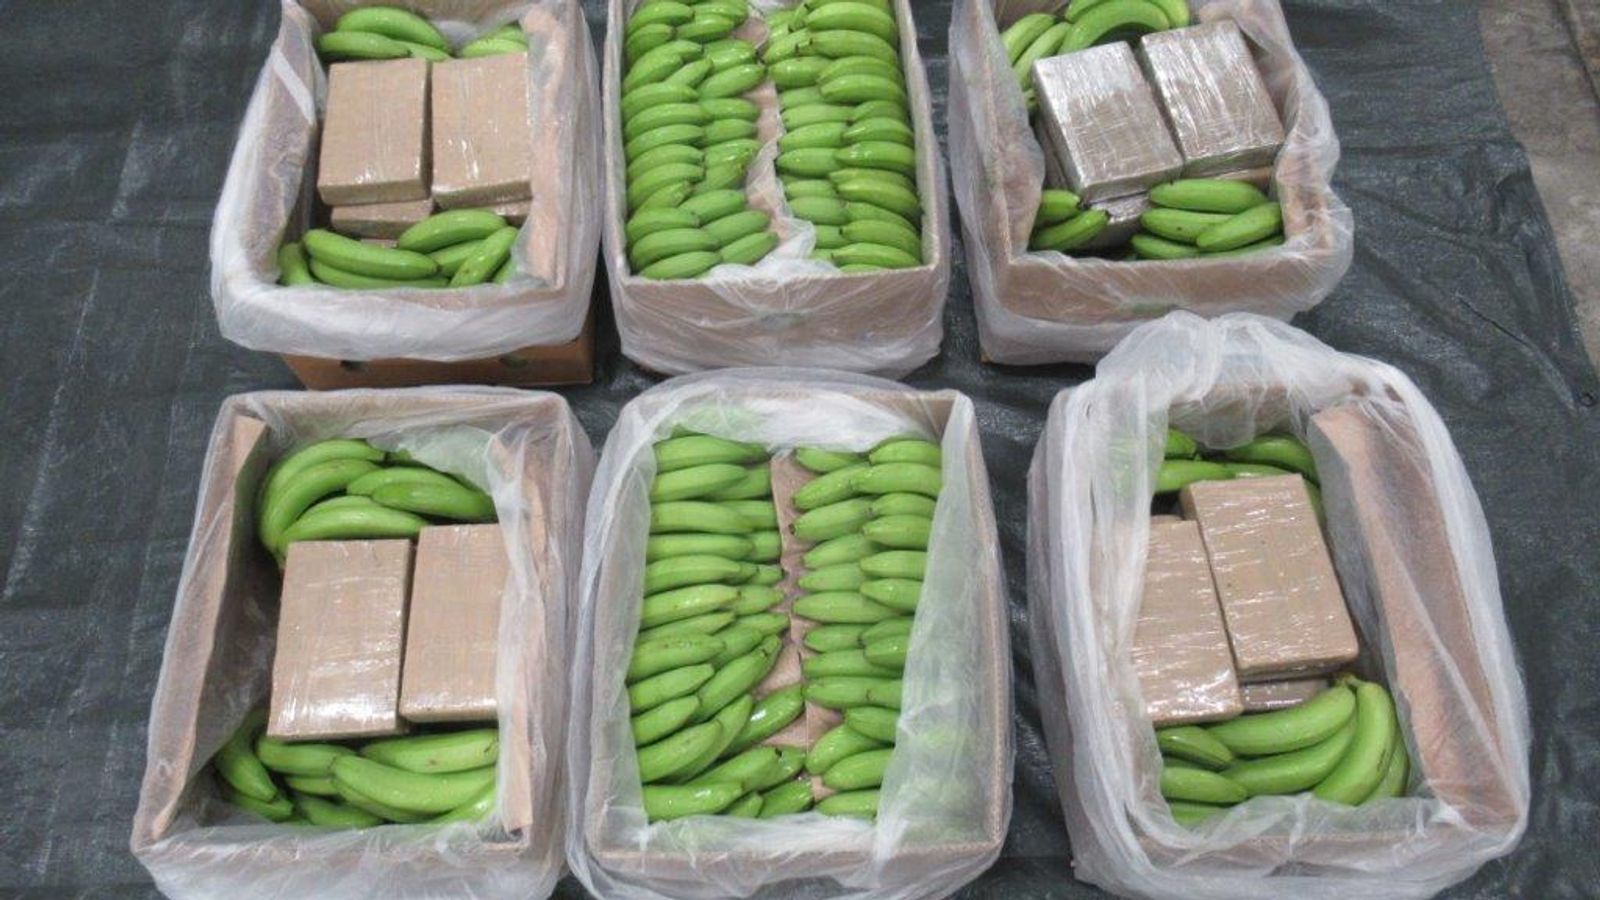 Cocaine haul worth £450m found hidden in banana shipment in largest-ever class A drugs bust